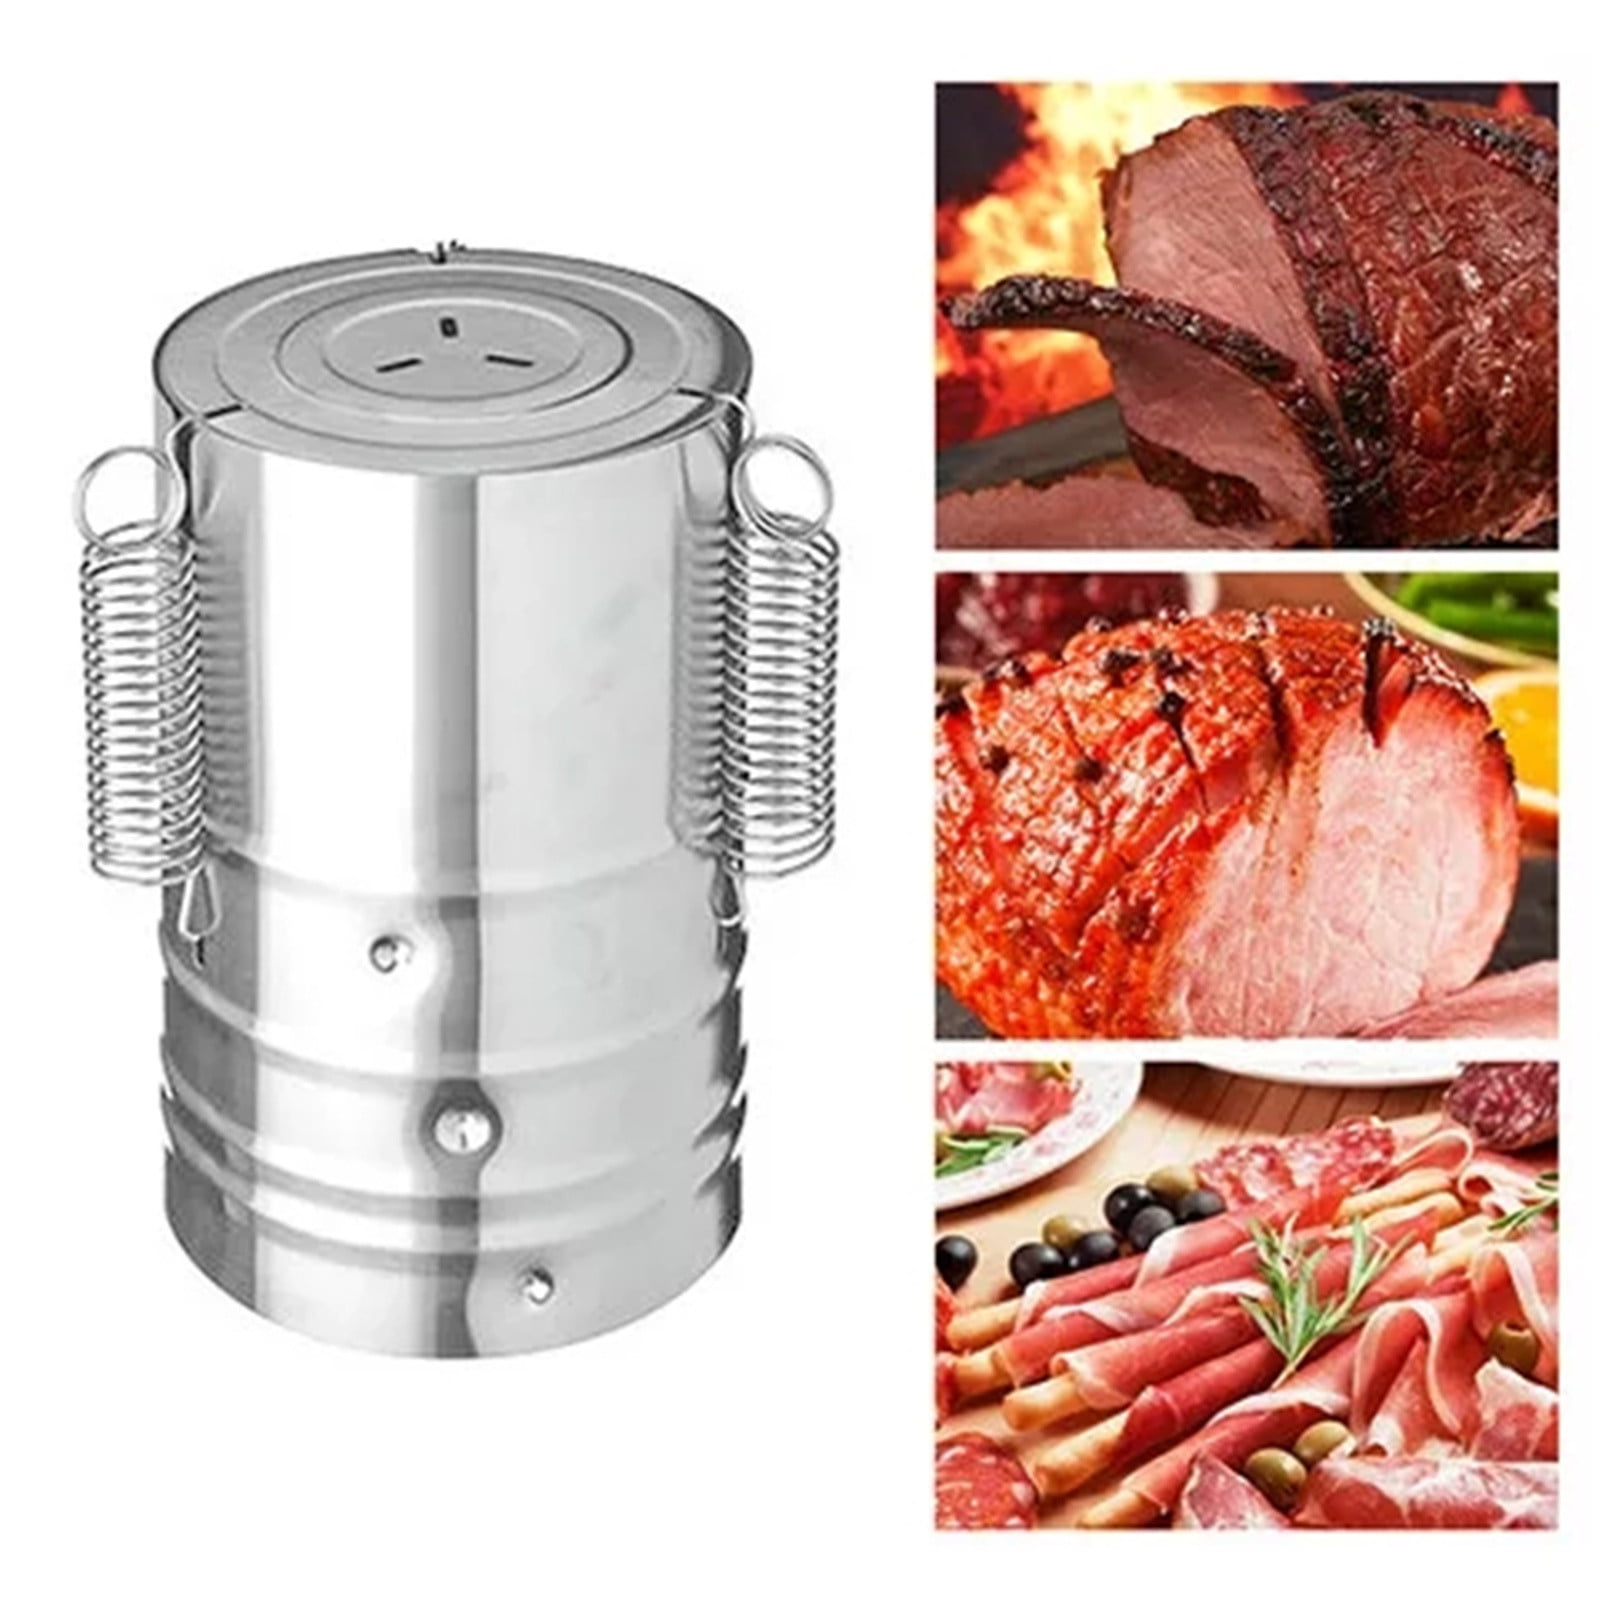 Ham Maker Stainless Steel Meat Press Maker With Thermometer For Sandwich Homemade Healthy Meat Recipe Include 20 PCS Cooking Bags Large 